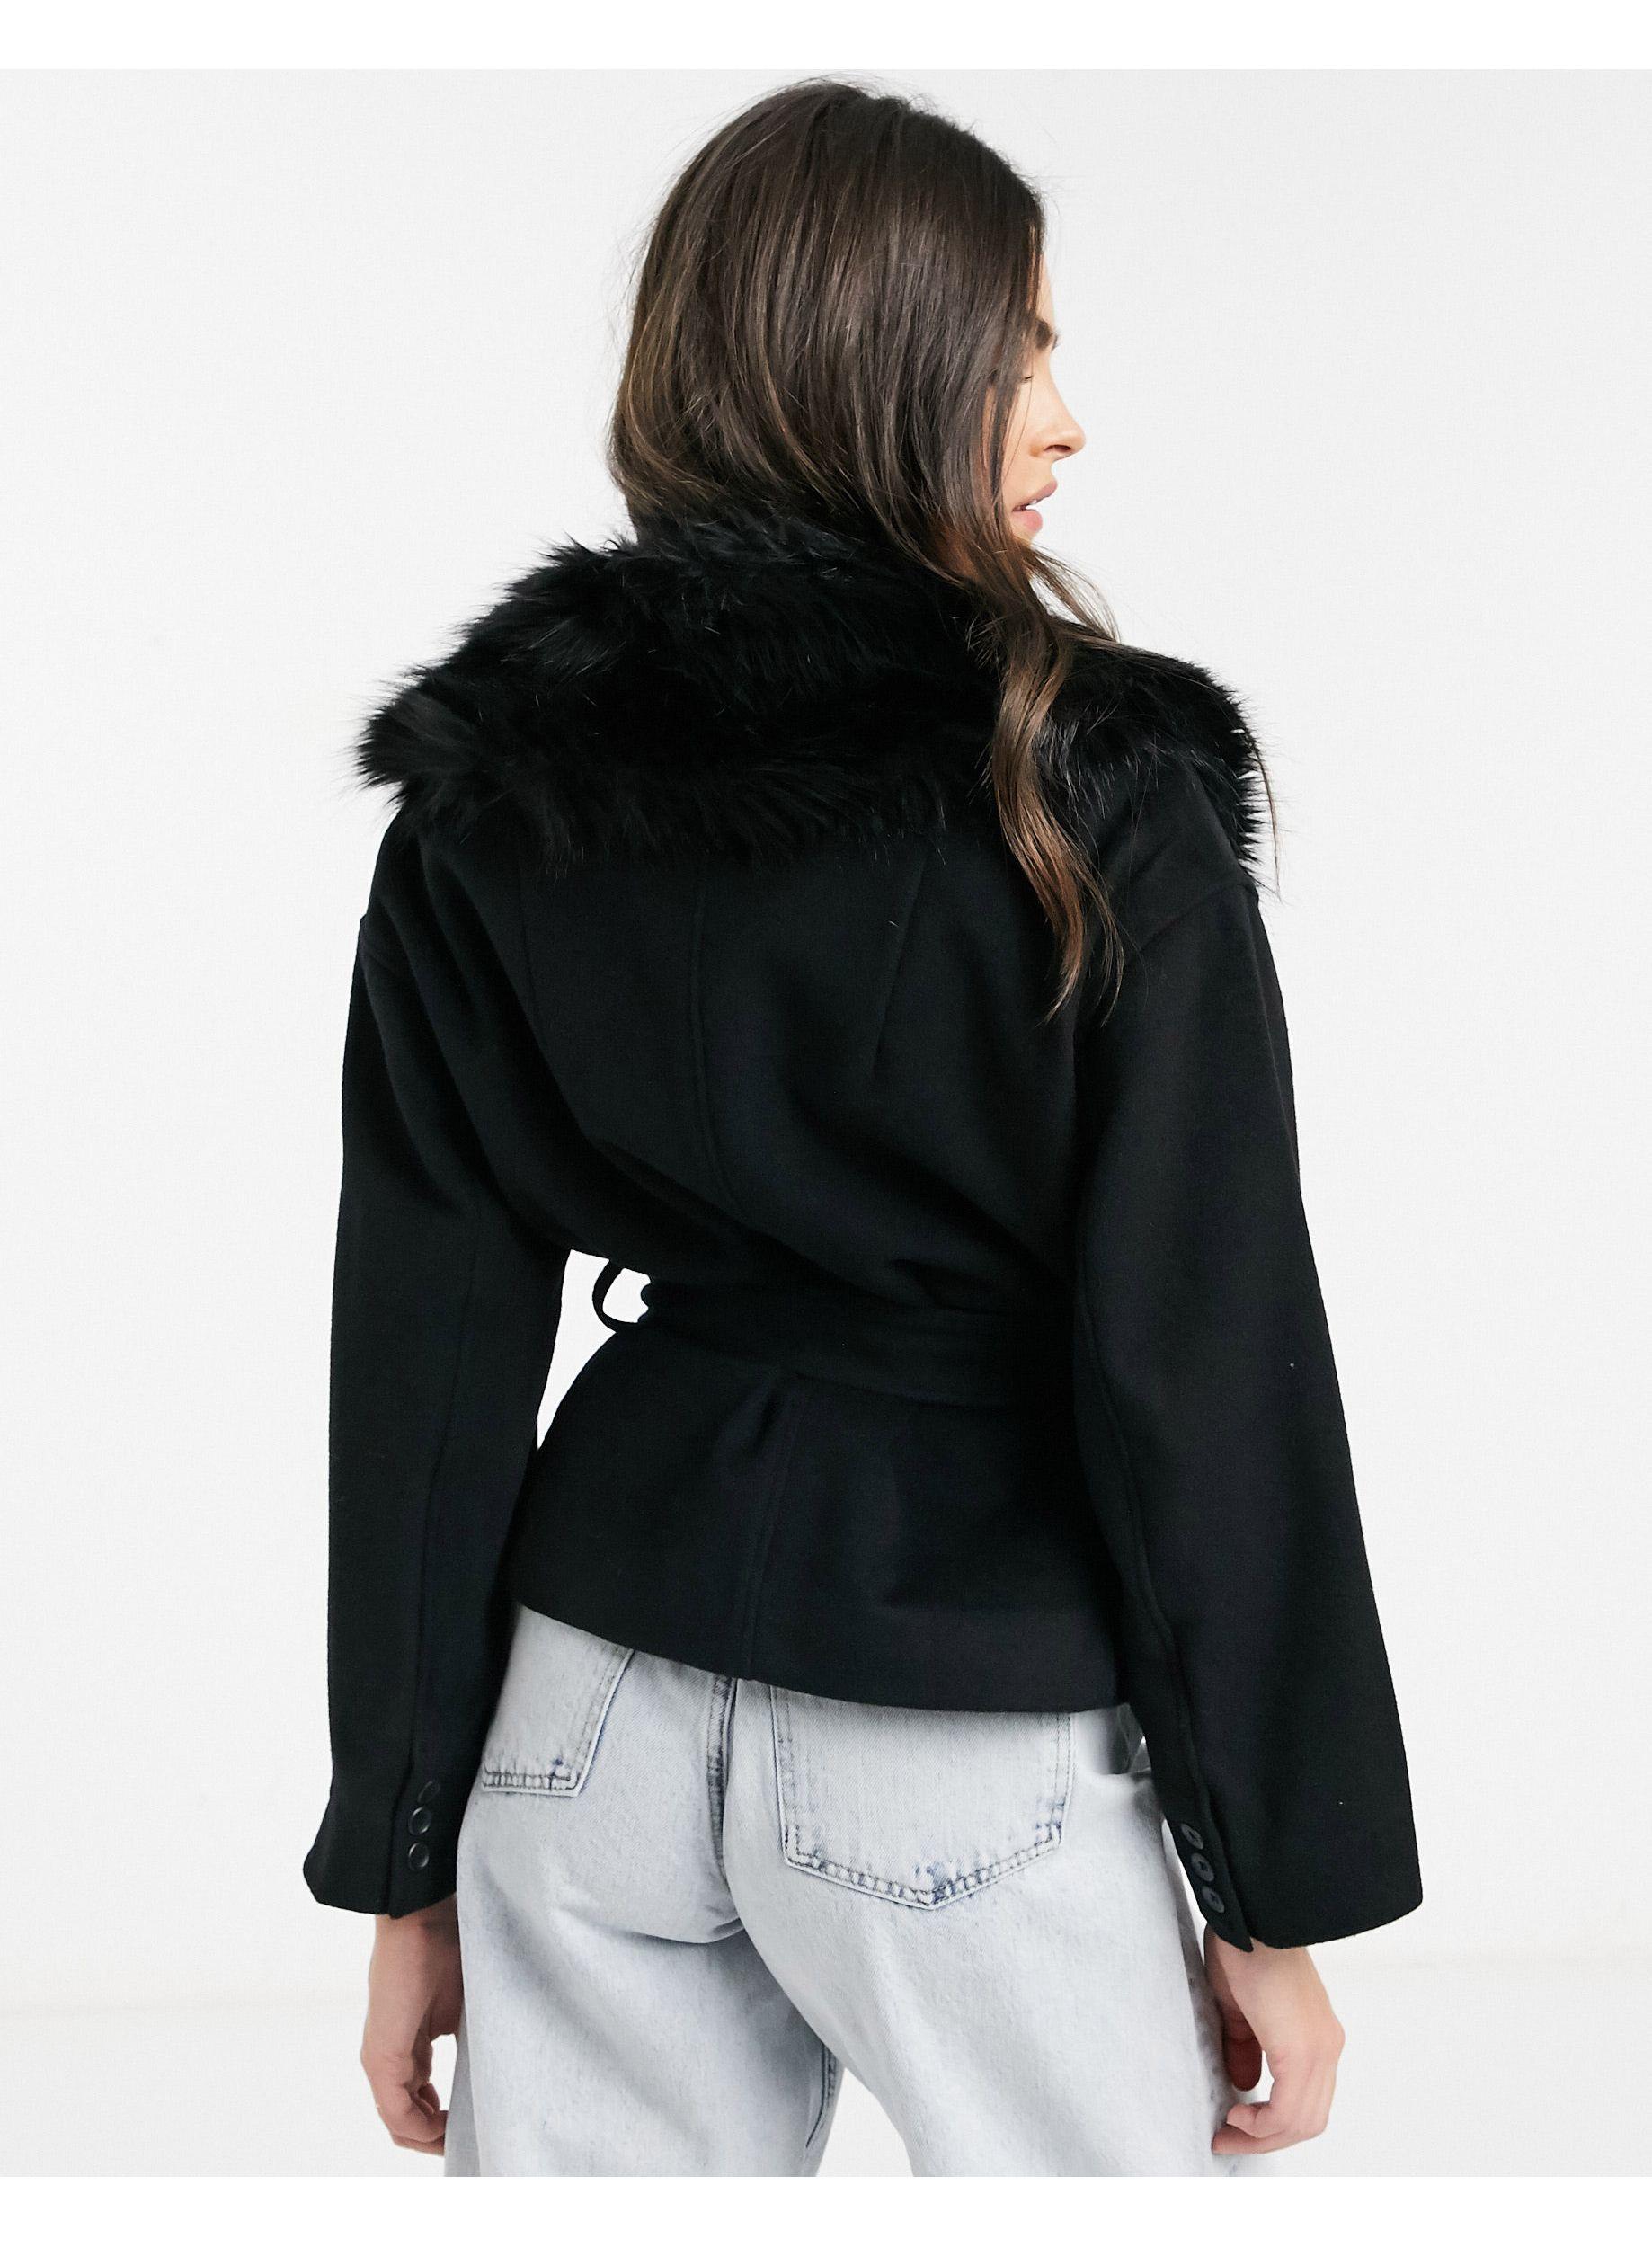 & Other Stories Short Belted Faux Fur Collar Coat in Black - Lyst